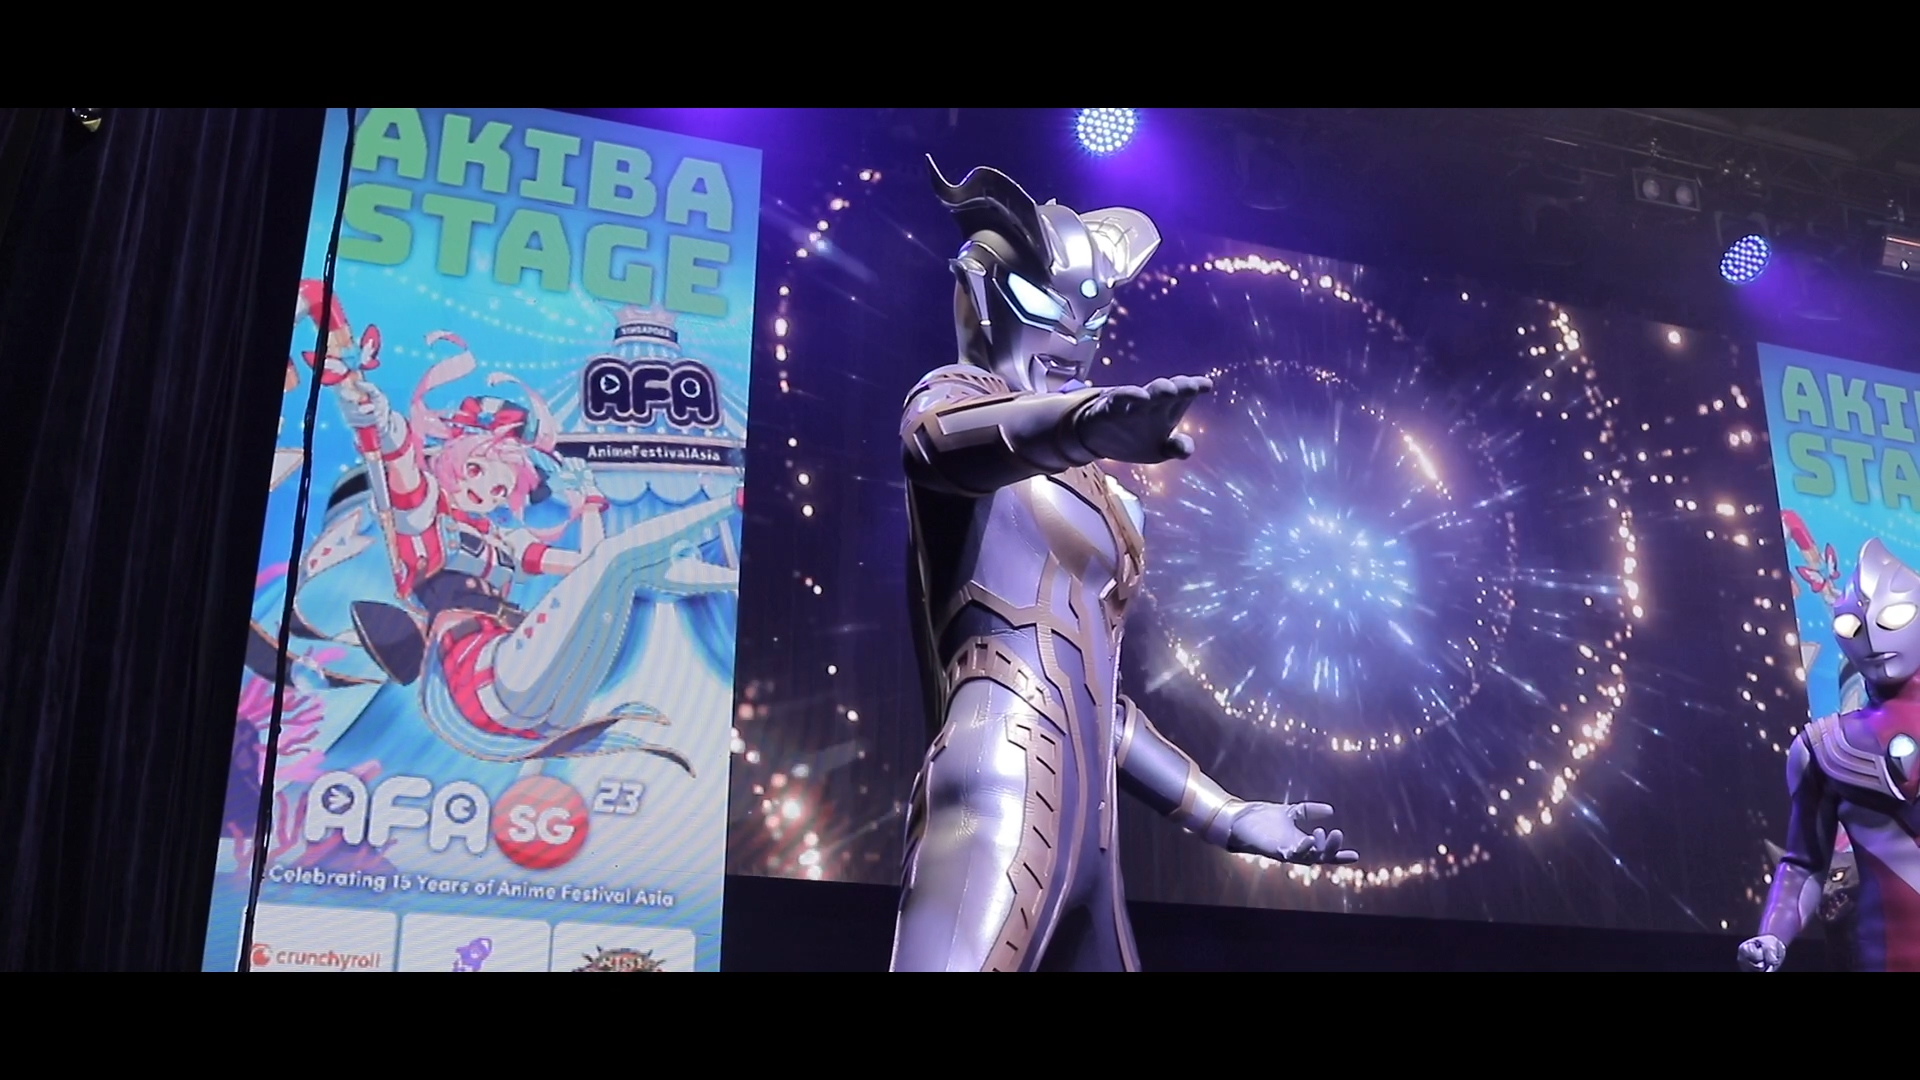 Ultraman Card Game made its debut at AFA23. Fans and visitors enjoyed trial plays and the live stage. Meet & Greet with Ultra Heroes also attracted many fans. More demonstrations will follow before its launch in 2024.